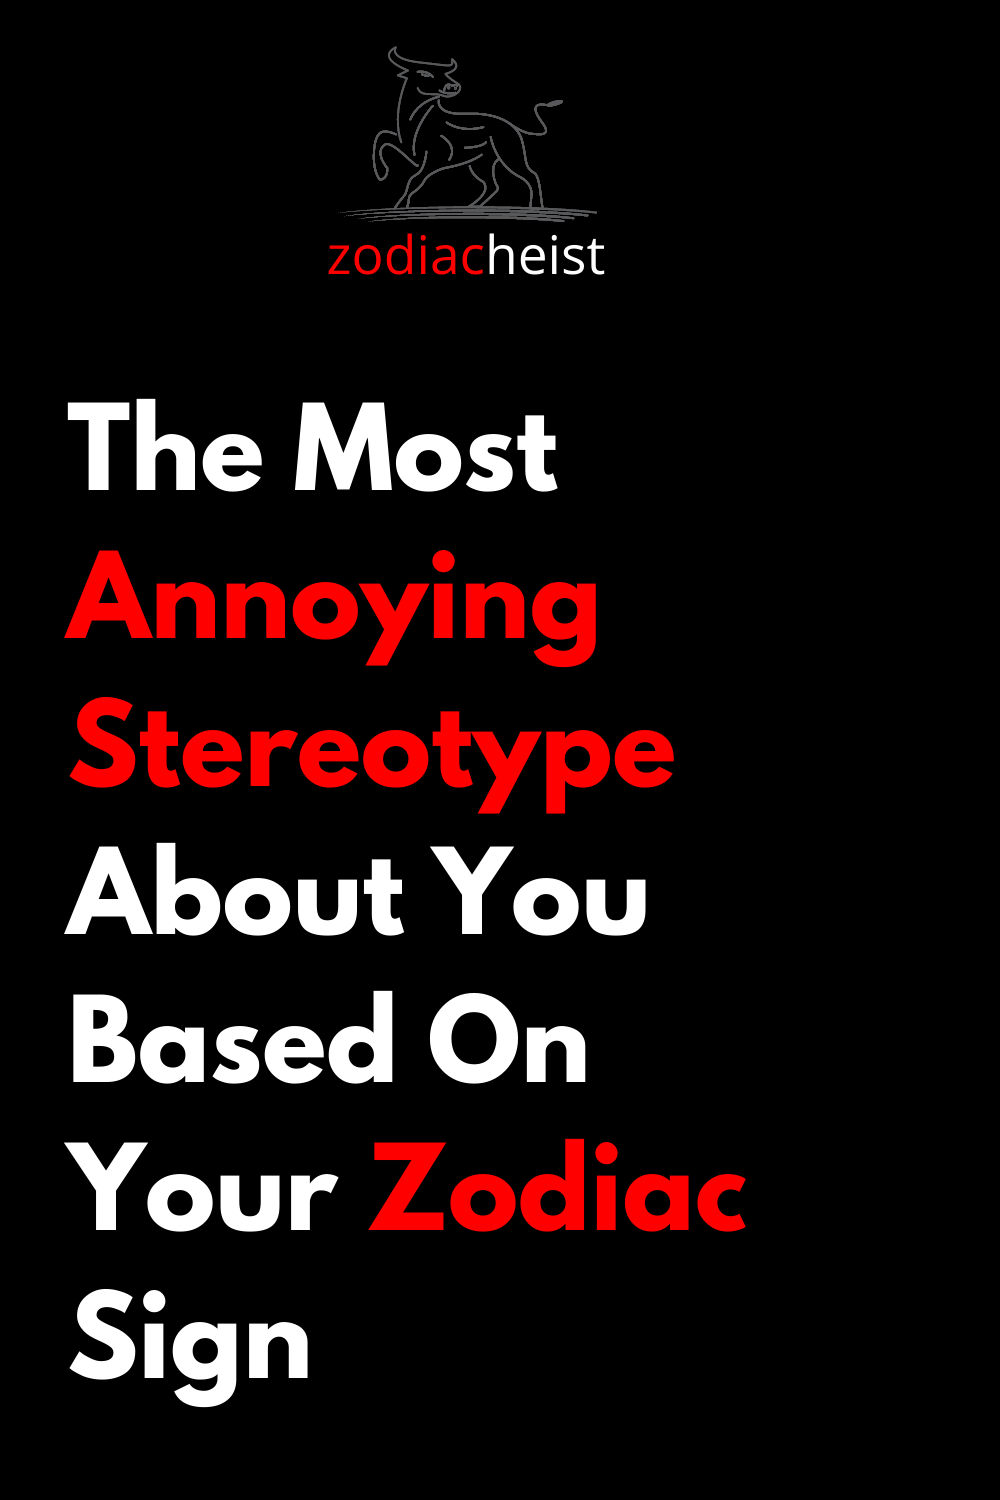 The Most Annoying Stereotype About You Based On Your Zodiac Sign